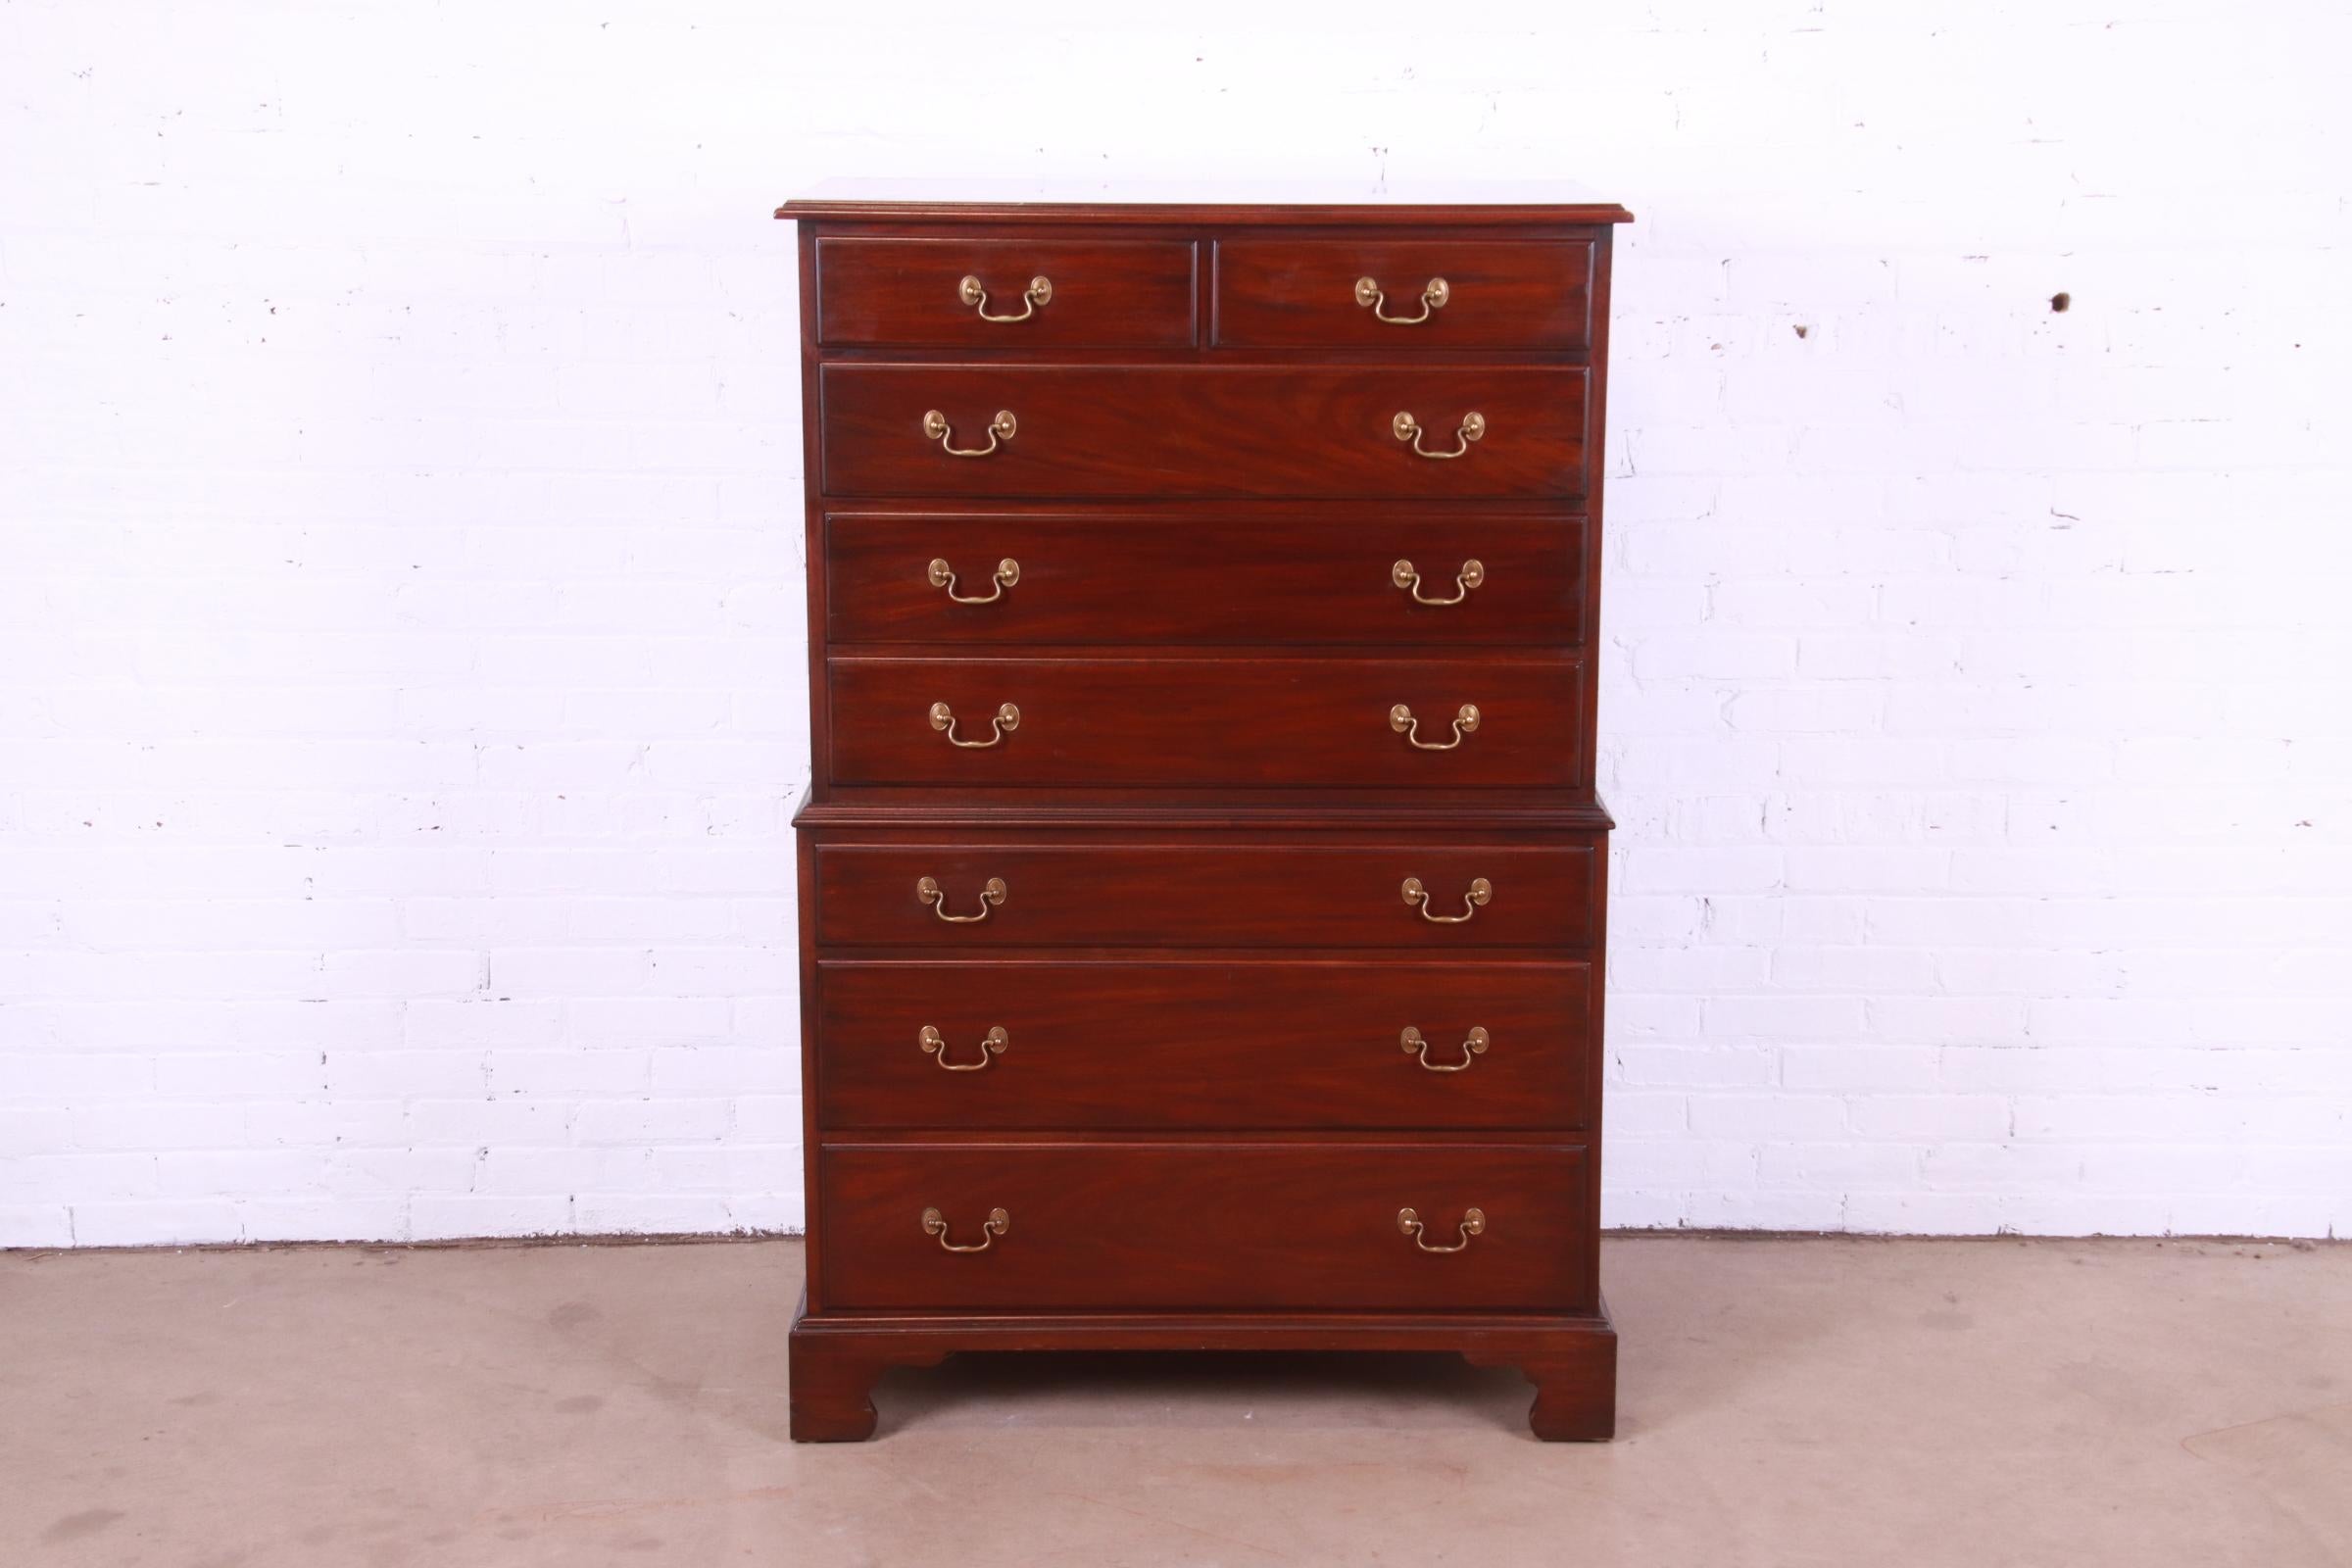 A gorgeous American Colonial or Chippendale style eight-drawer highboy chest of drawers

By Henkel Harris

USA, 1978

Solid mahogany, with original brass hardware.

Measures: 37.25